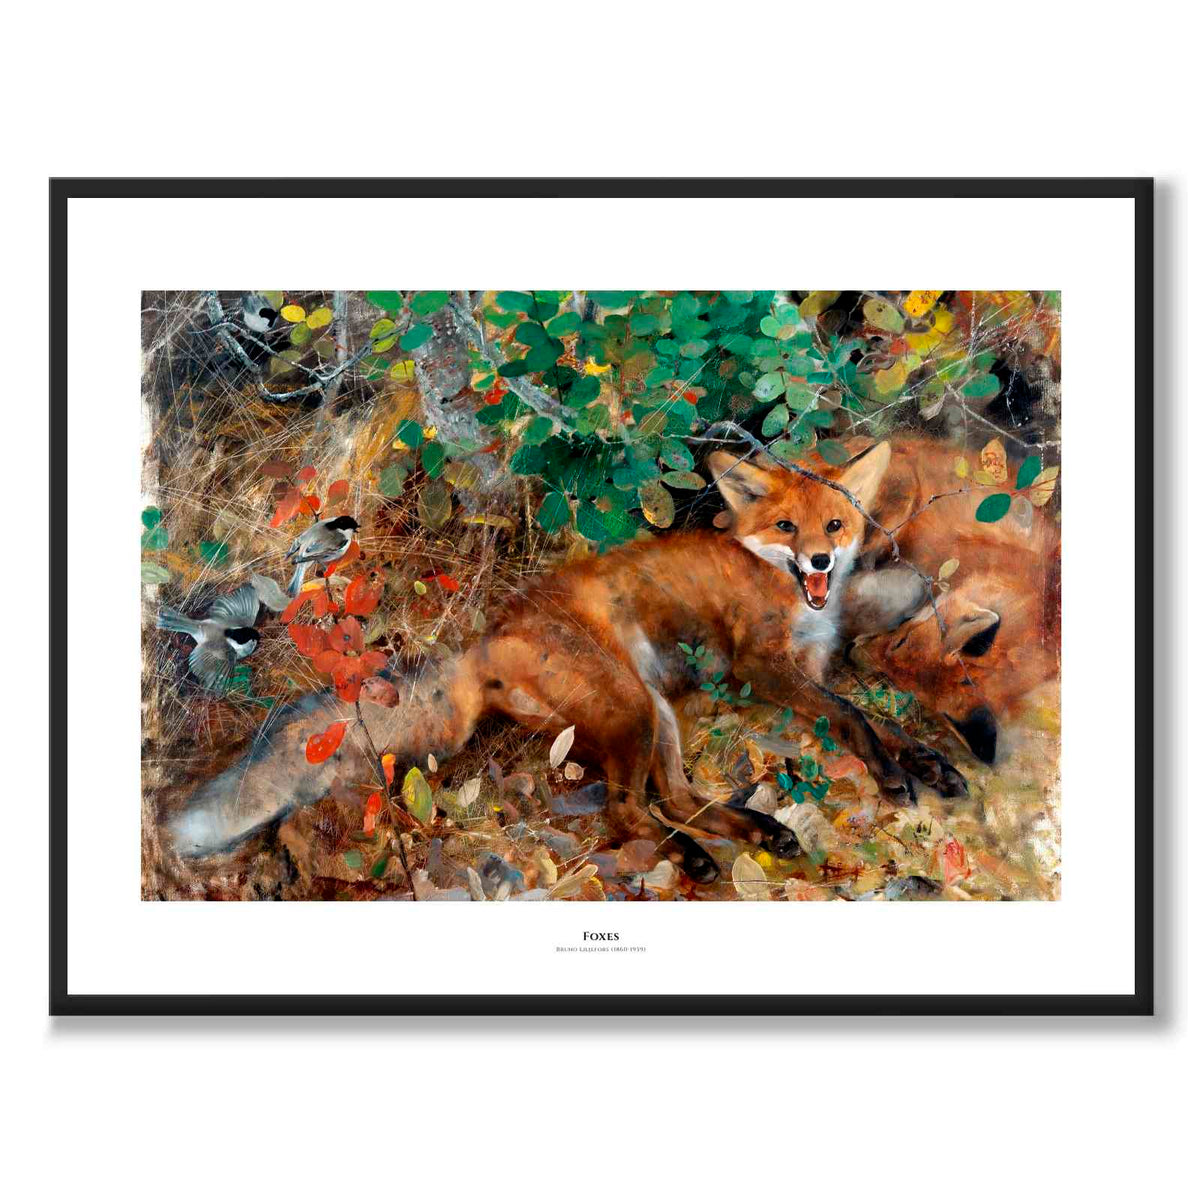 Foxes - Poster